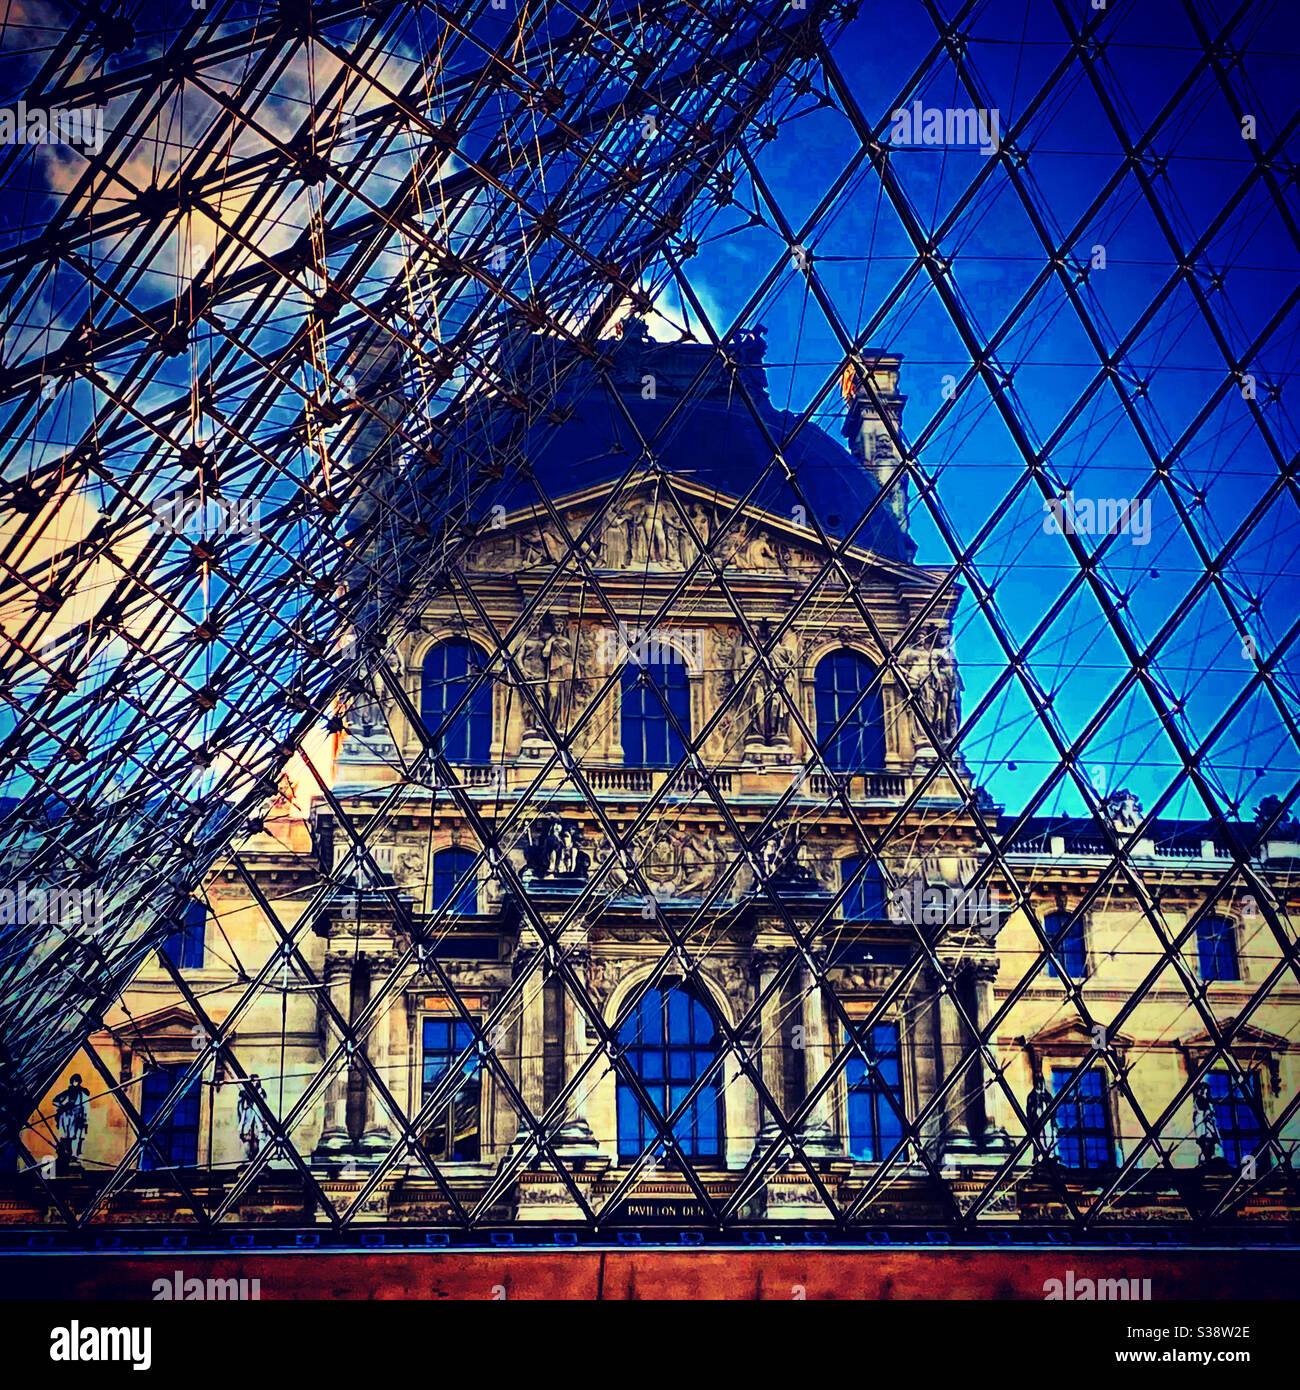 Louvre Museum through the glass pyramid Stock Photo